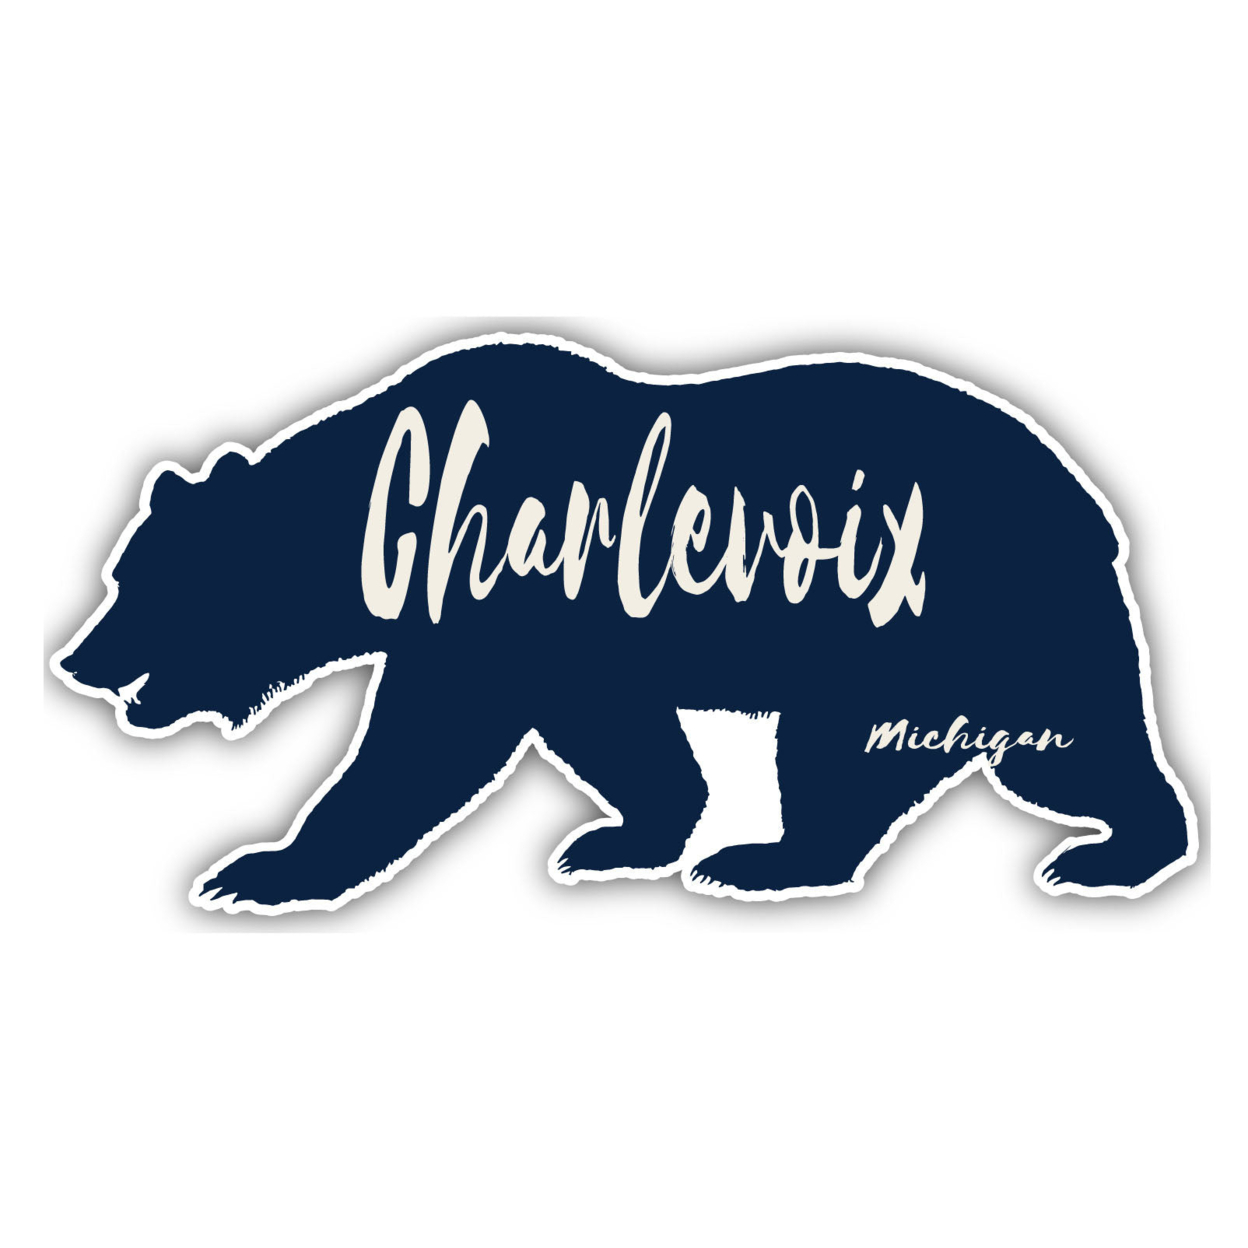 Charlevoix Michigan Souvenir Decorative Stickers (Choose Theme And Size) - 4-Pack, 8-Inch, Bear